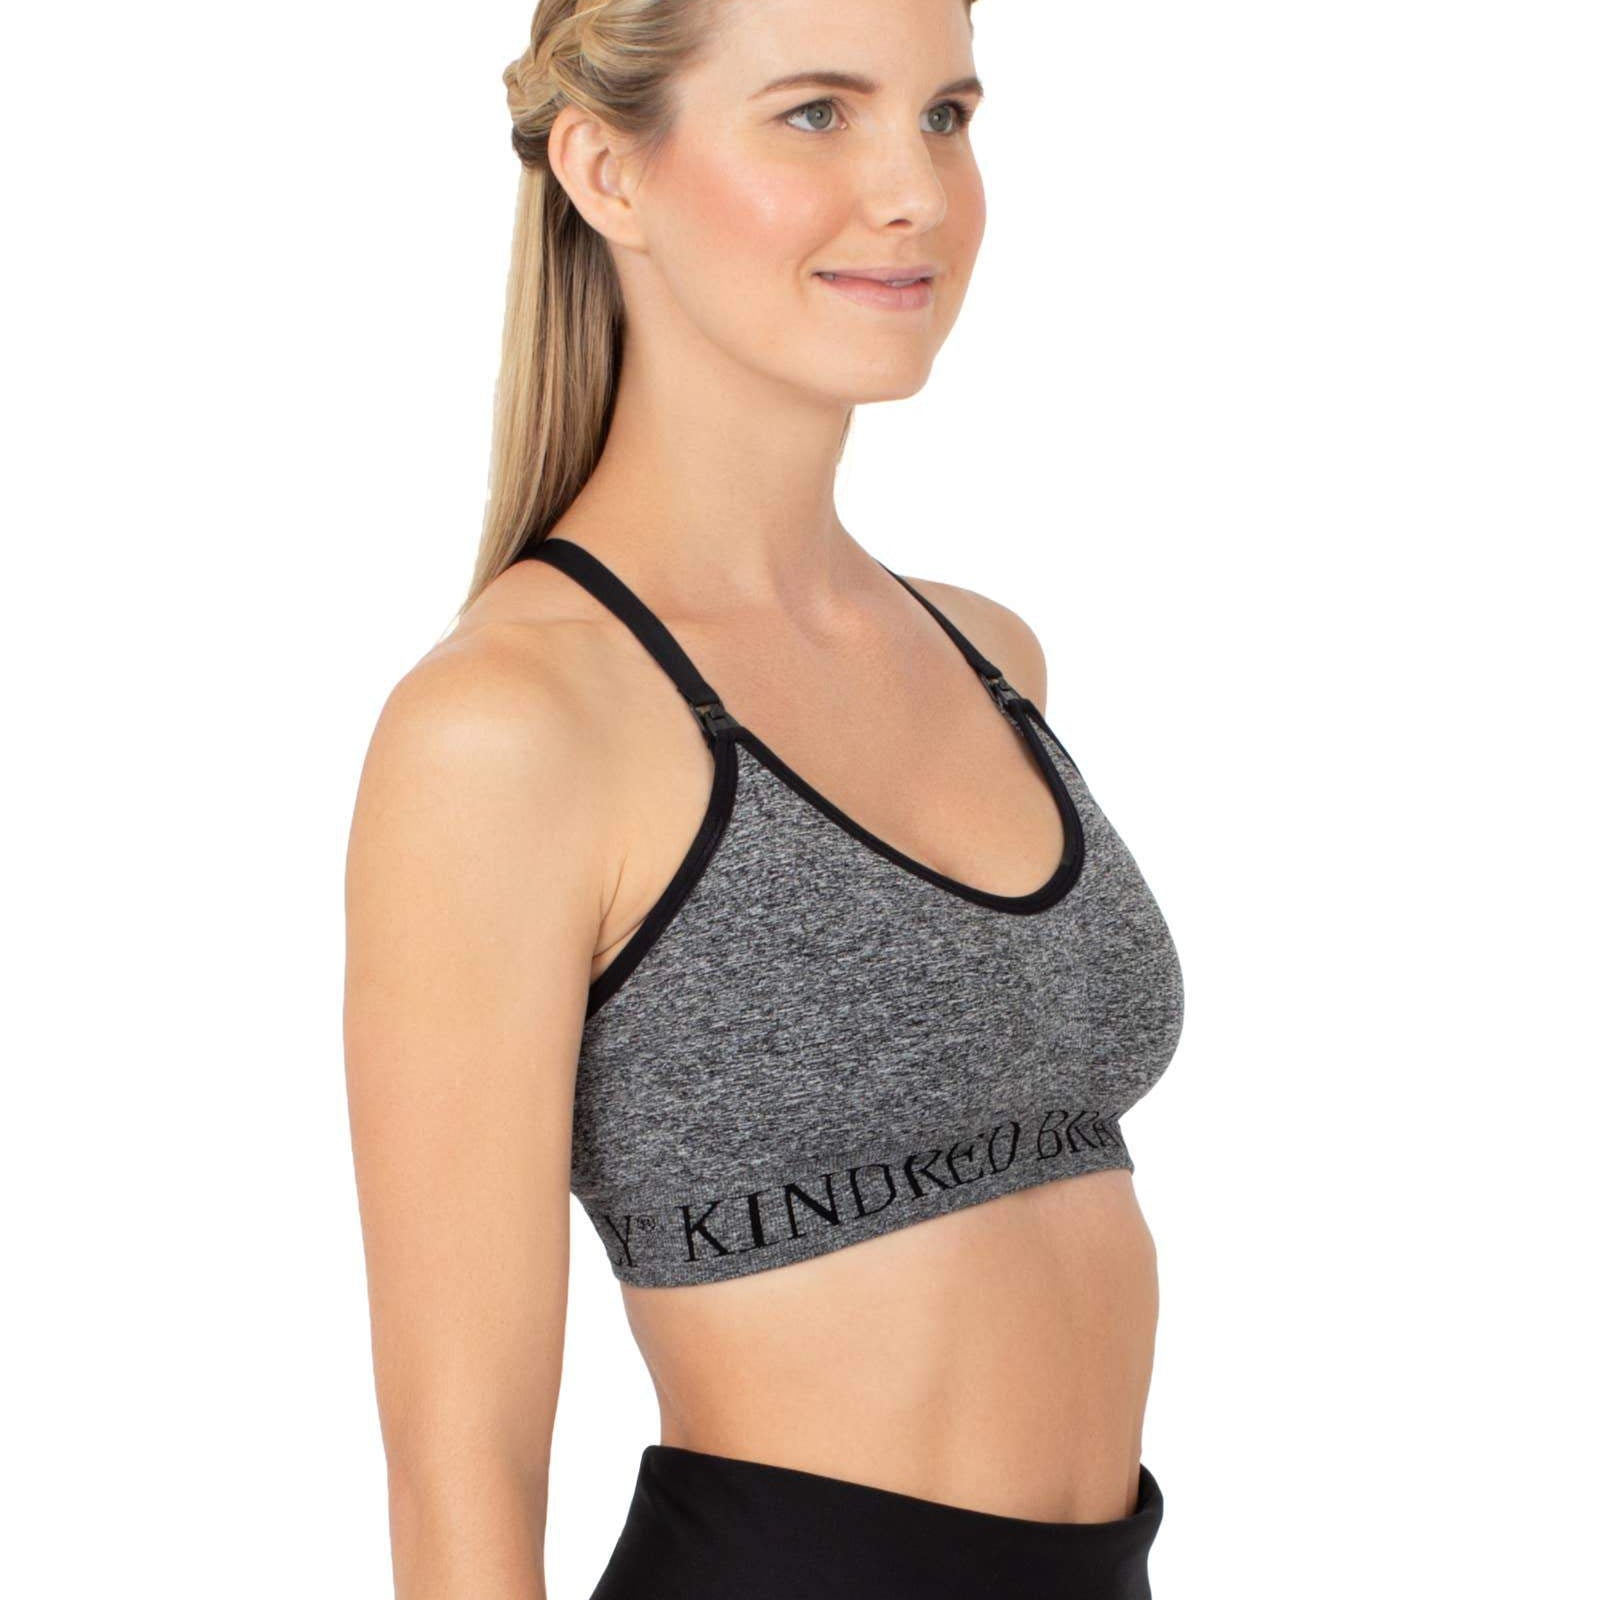 Sublime Support Low Impact Nursing & Maternity Sports Bra – The